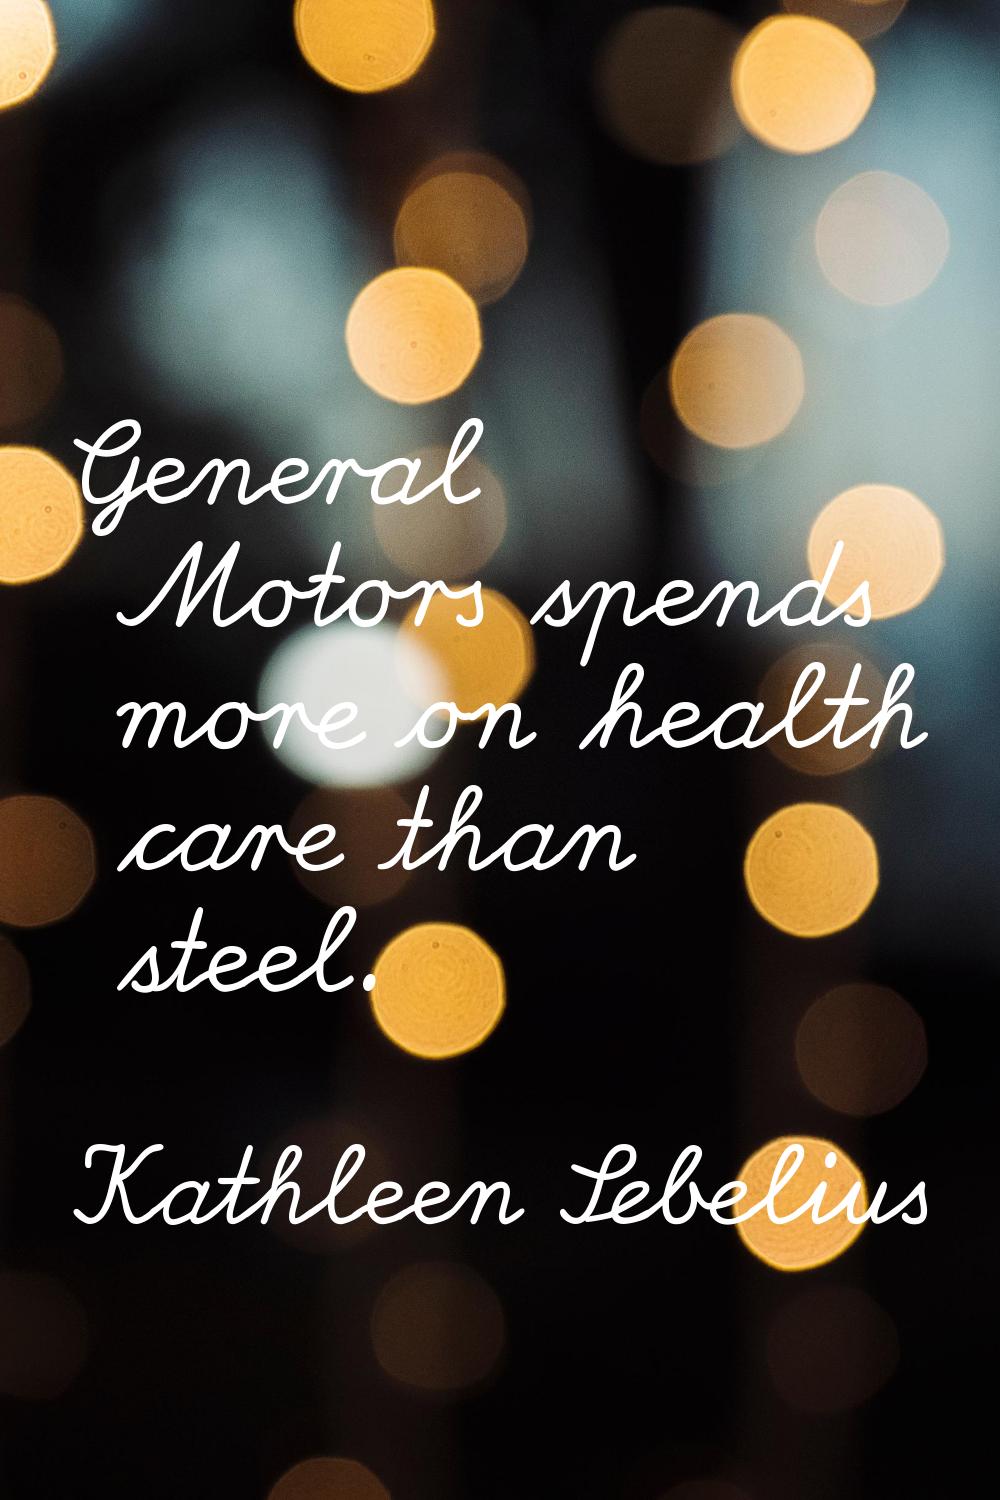 General Motors spends more on health care than steel.